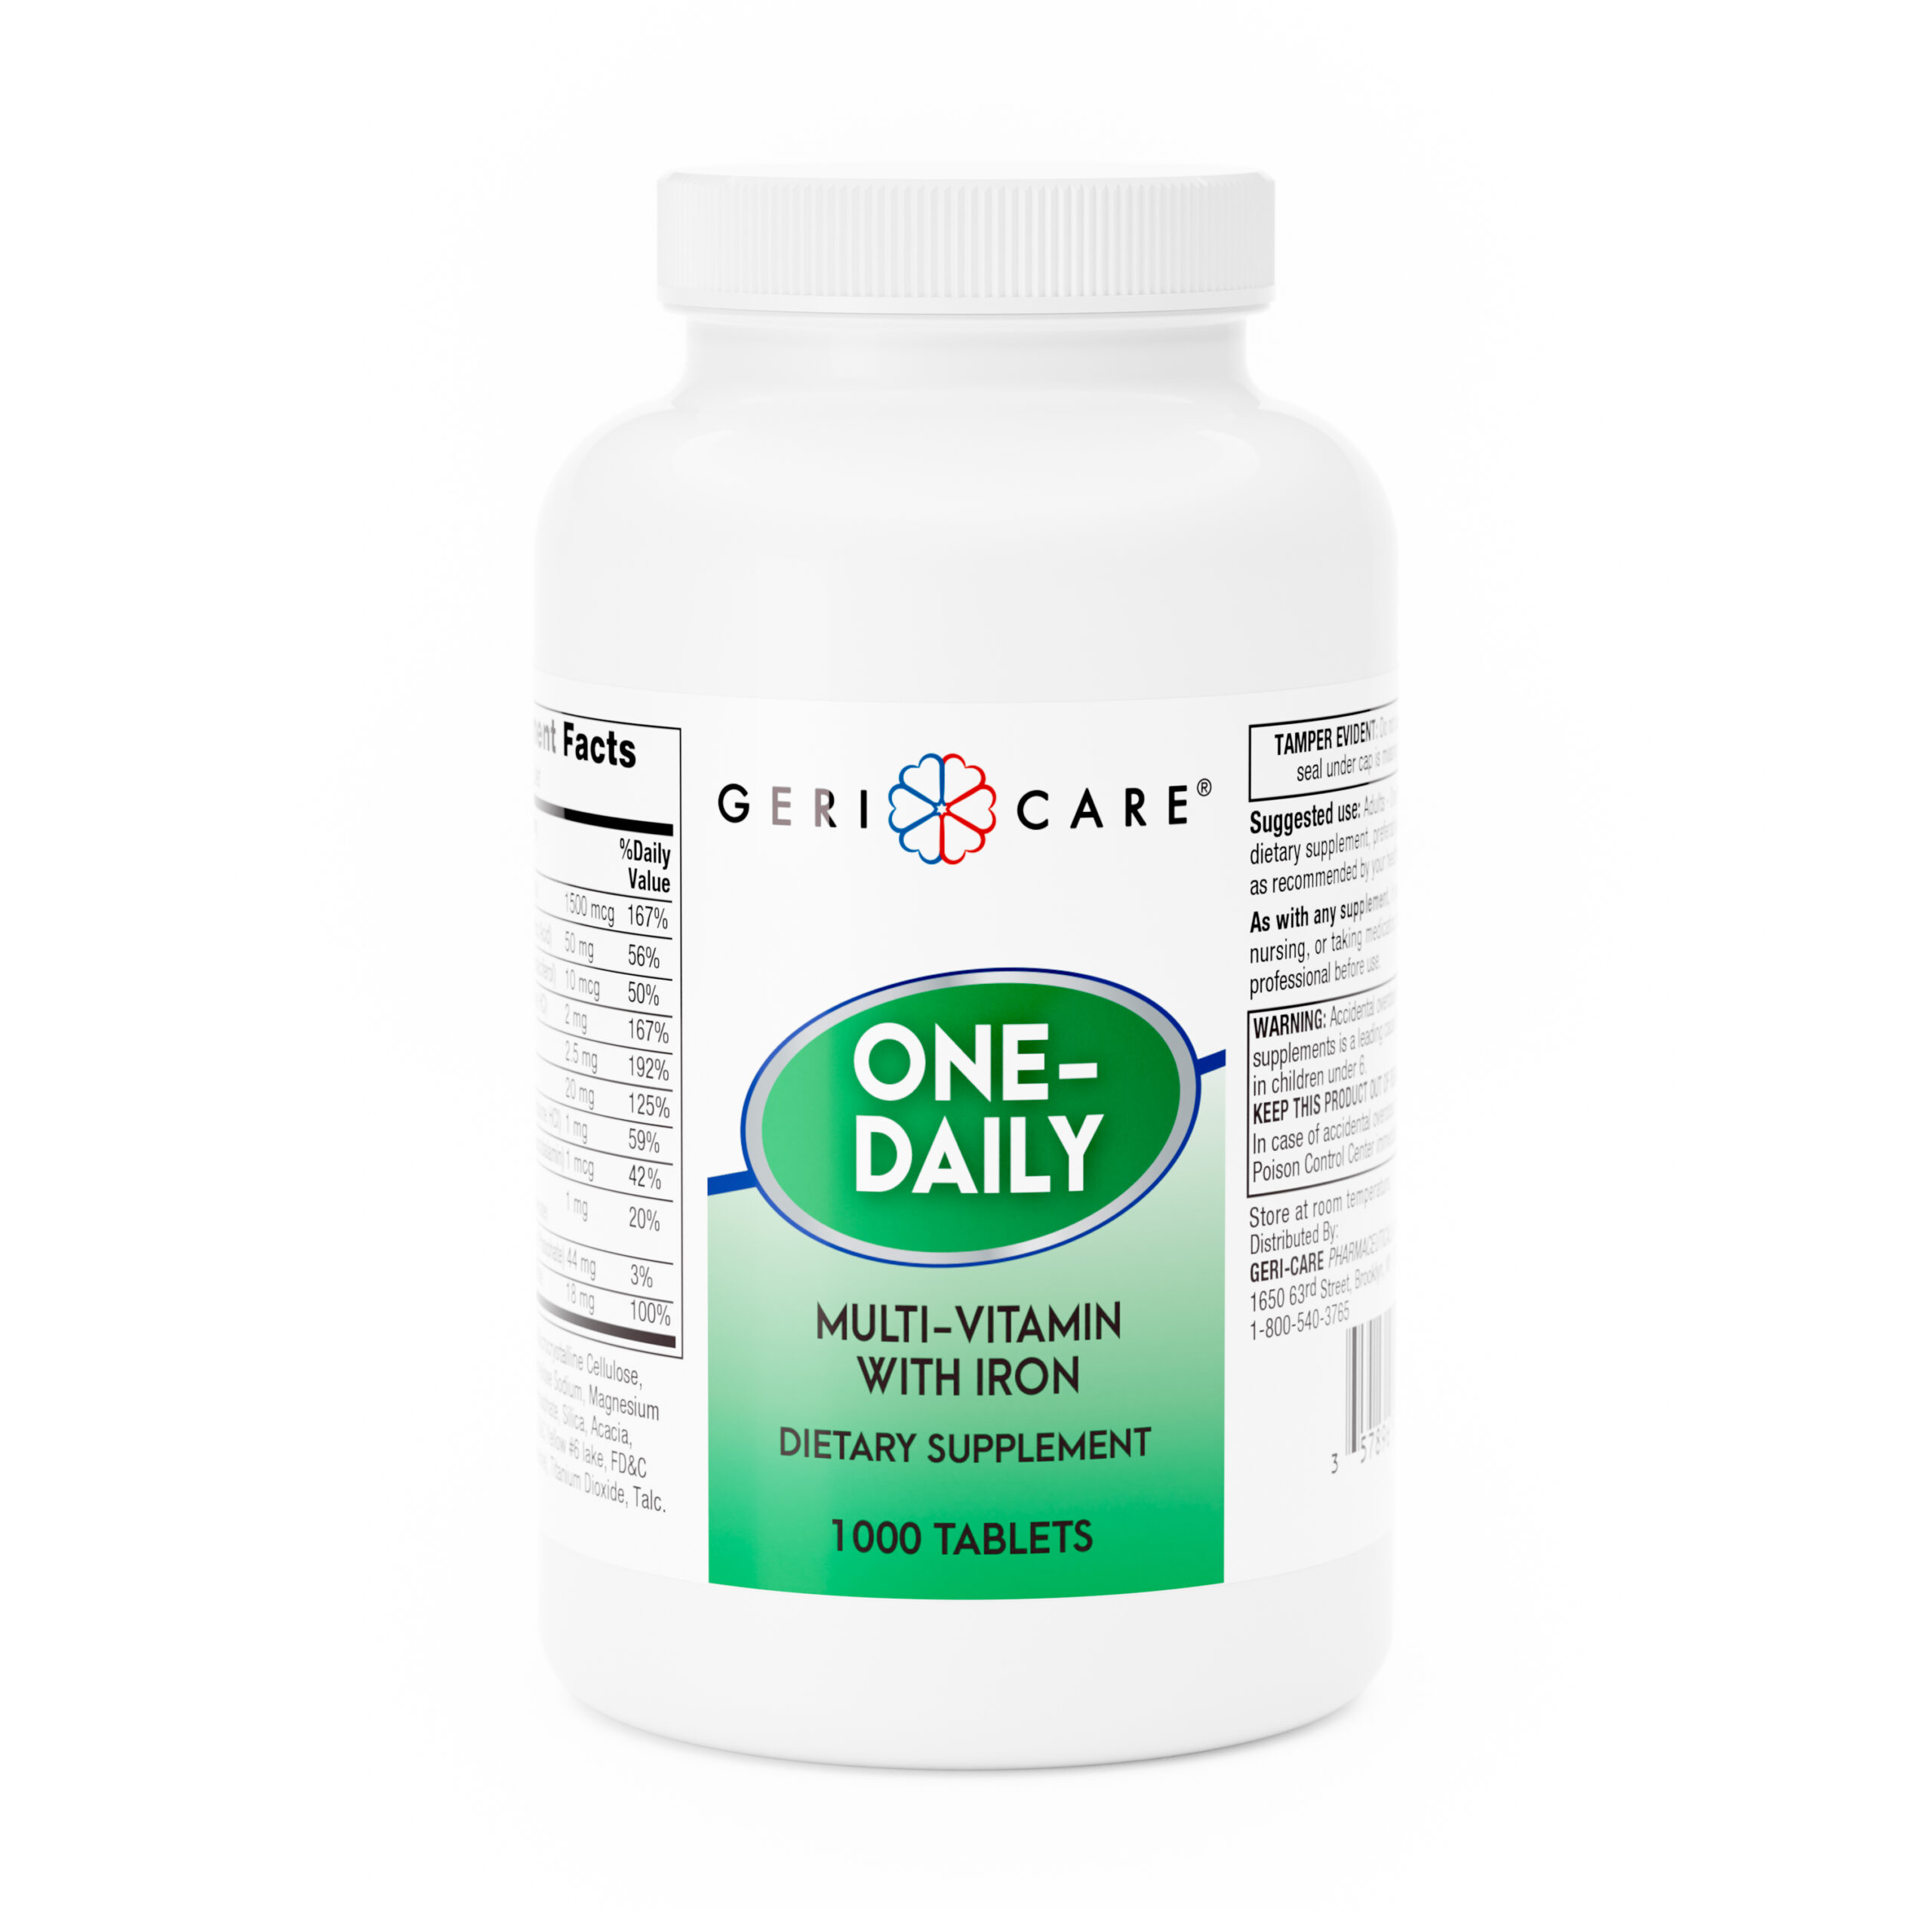 One-Daily Multi-Vitamin + Iron – 1000 Tablets